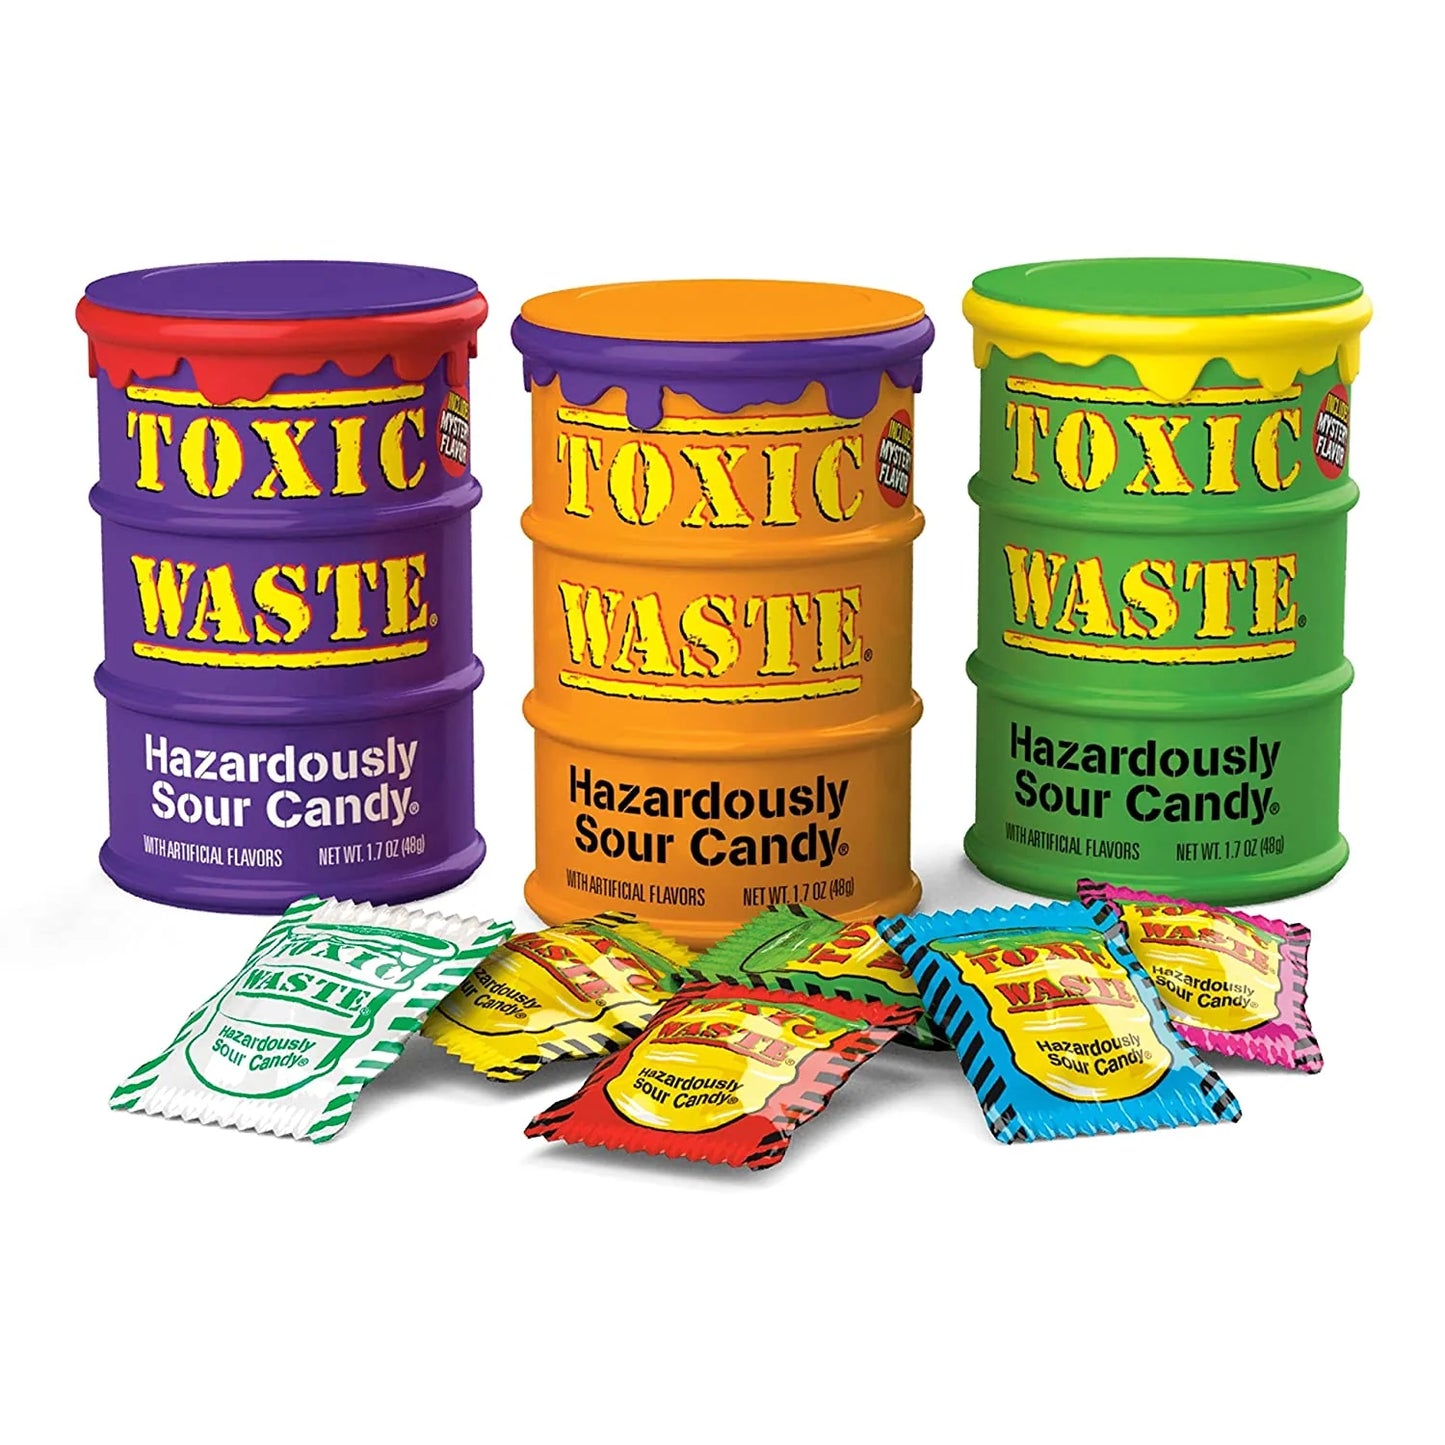 TOXIC WASTE - SOUR CANDY